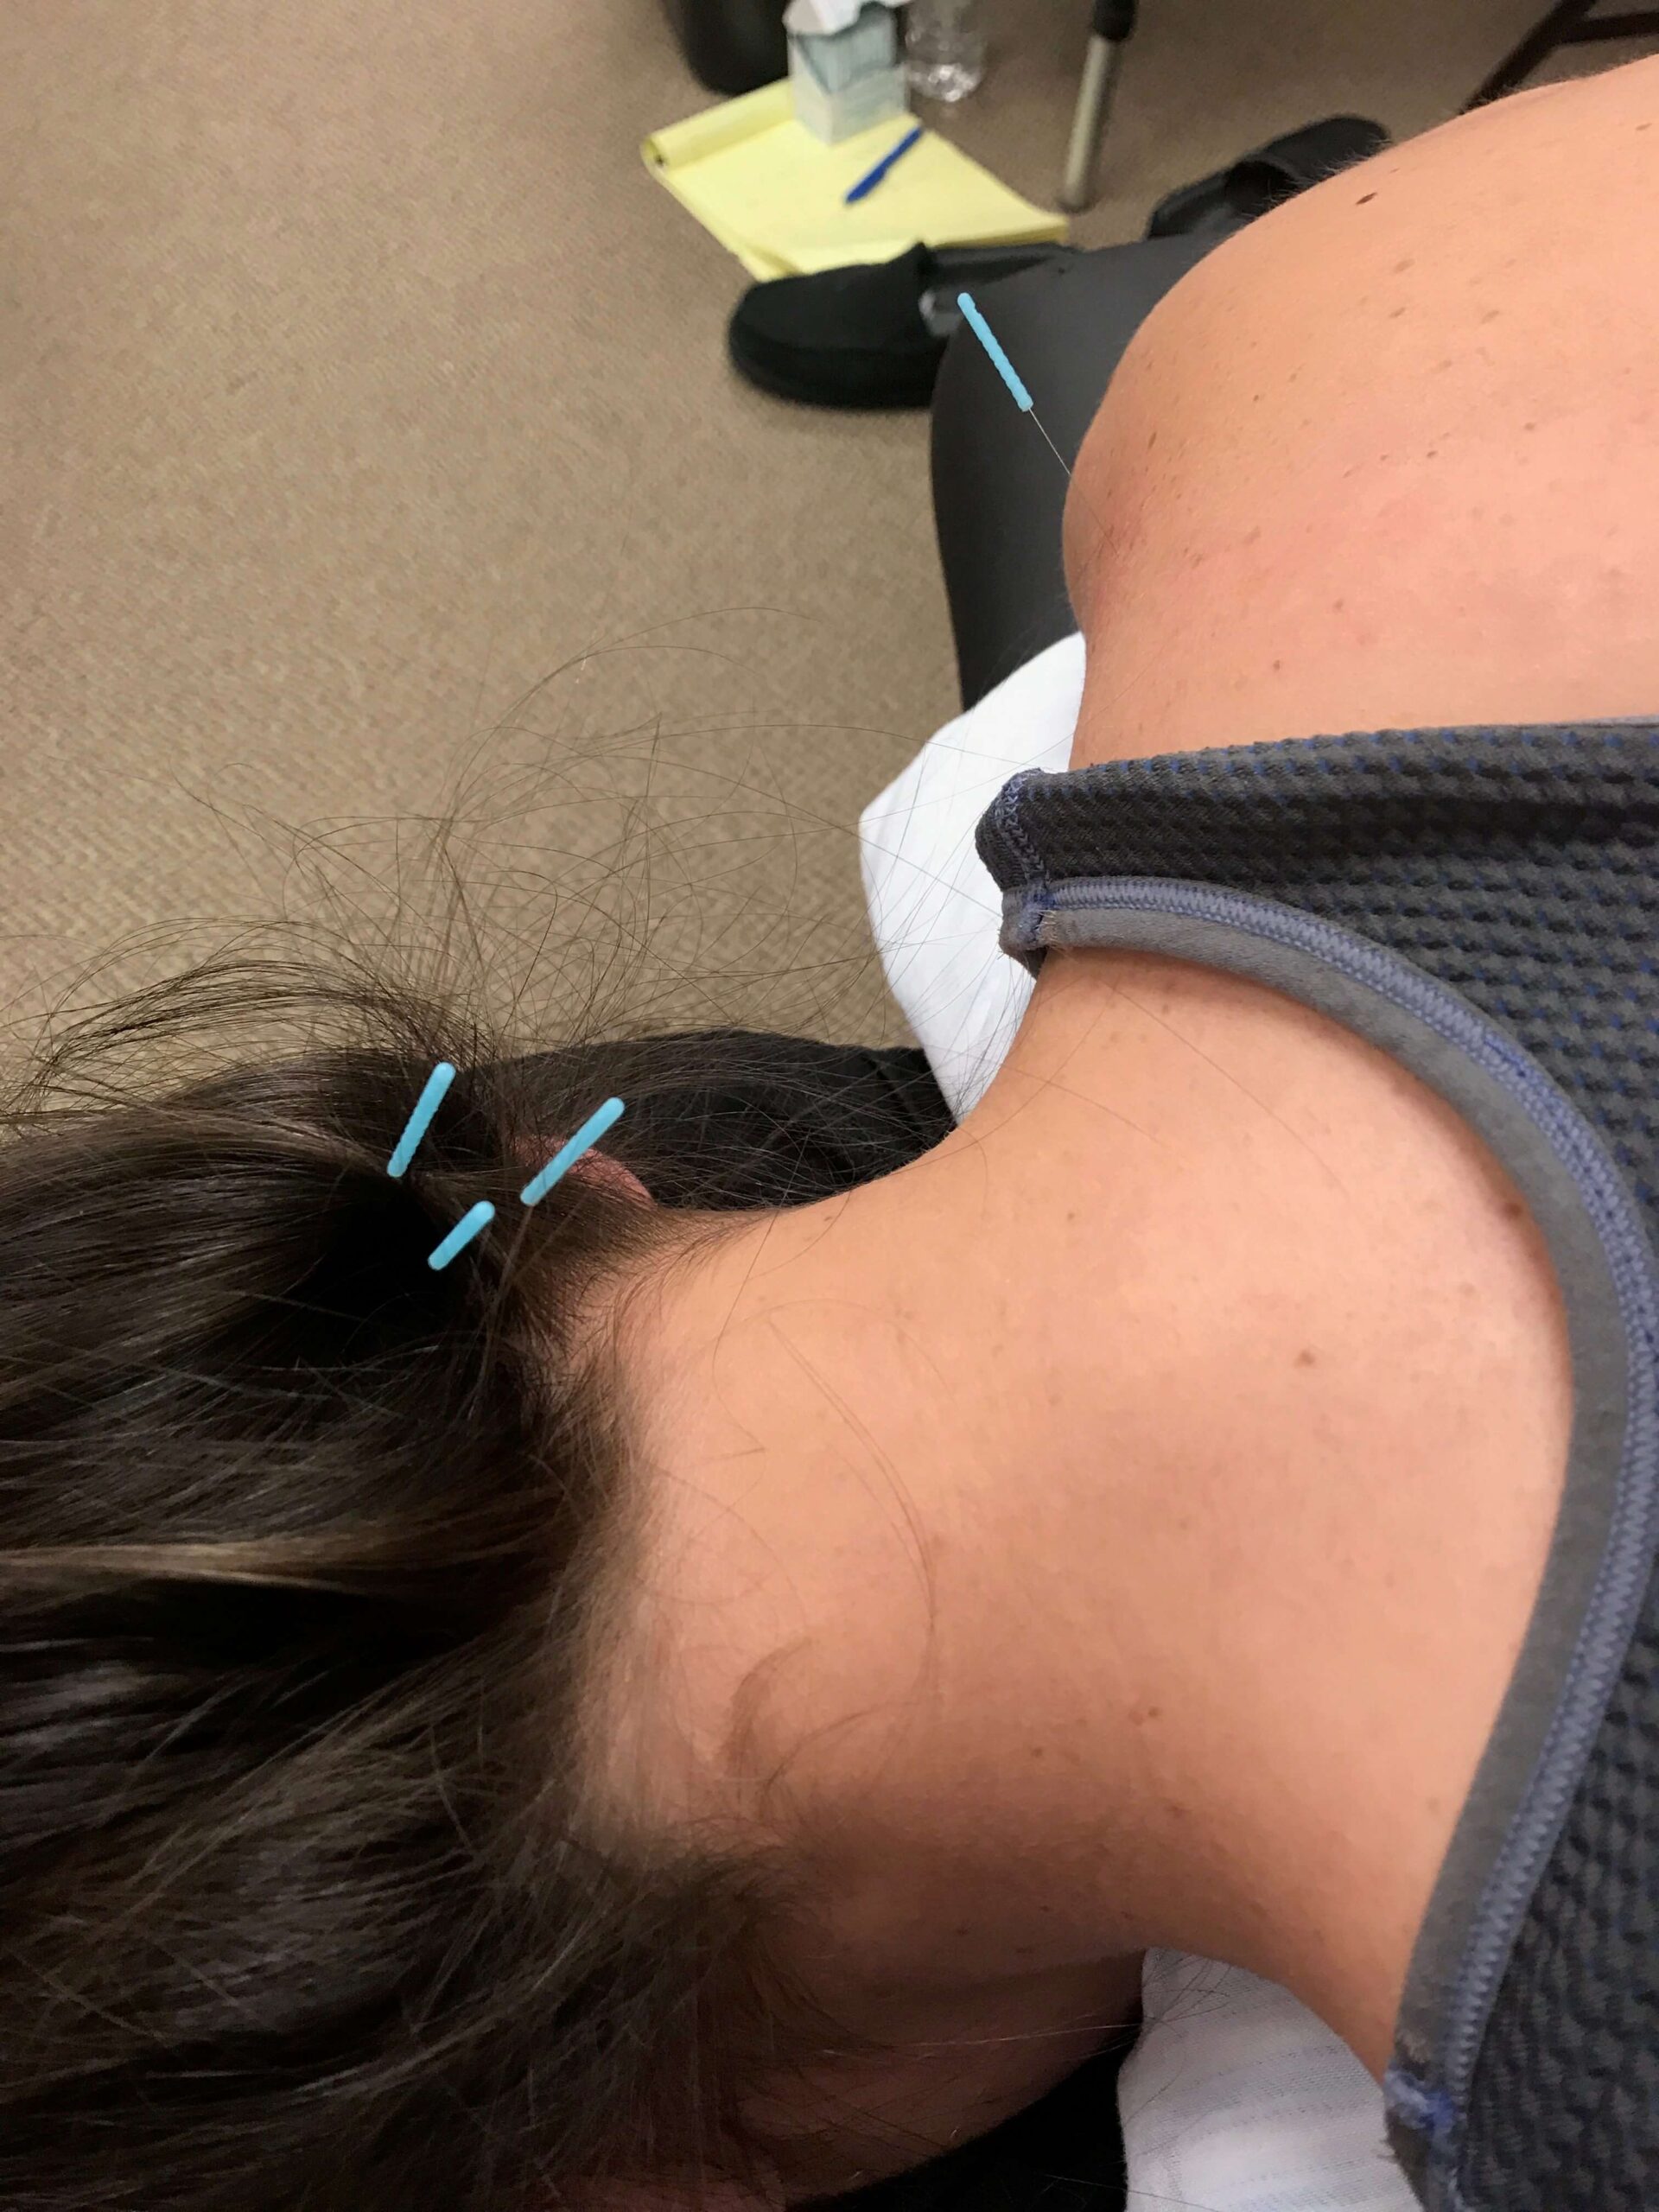 Dry Needling Therapy  (DNT) Frequently Asked Questions